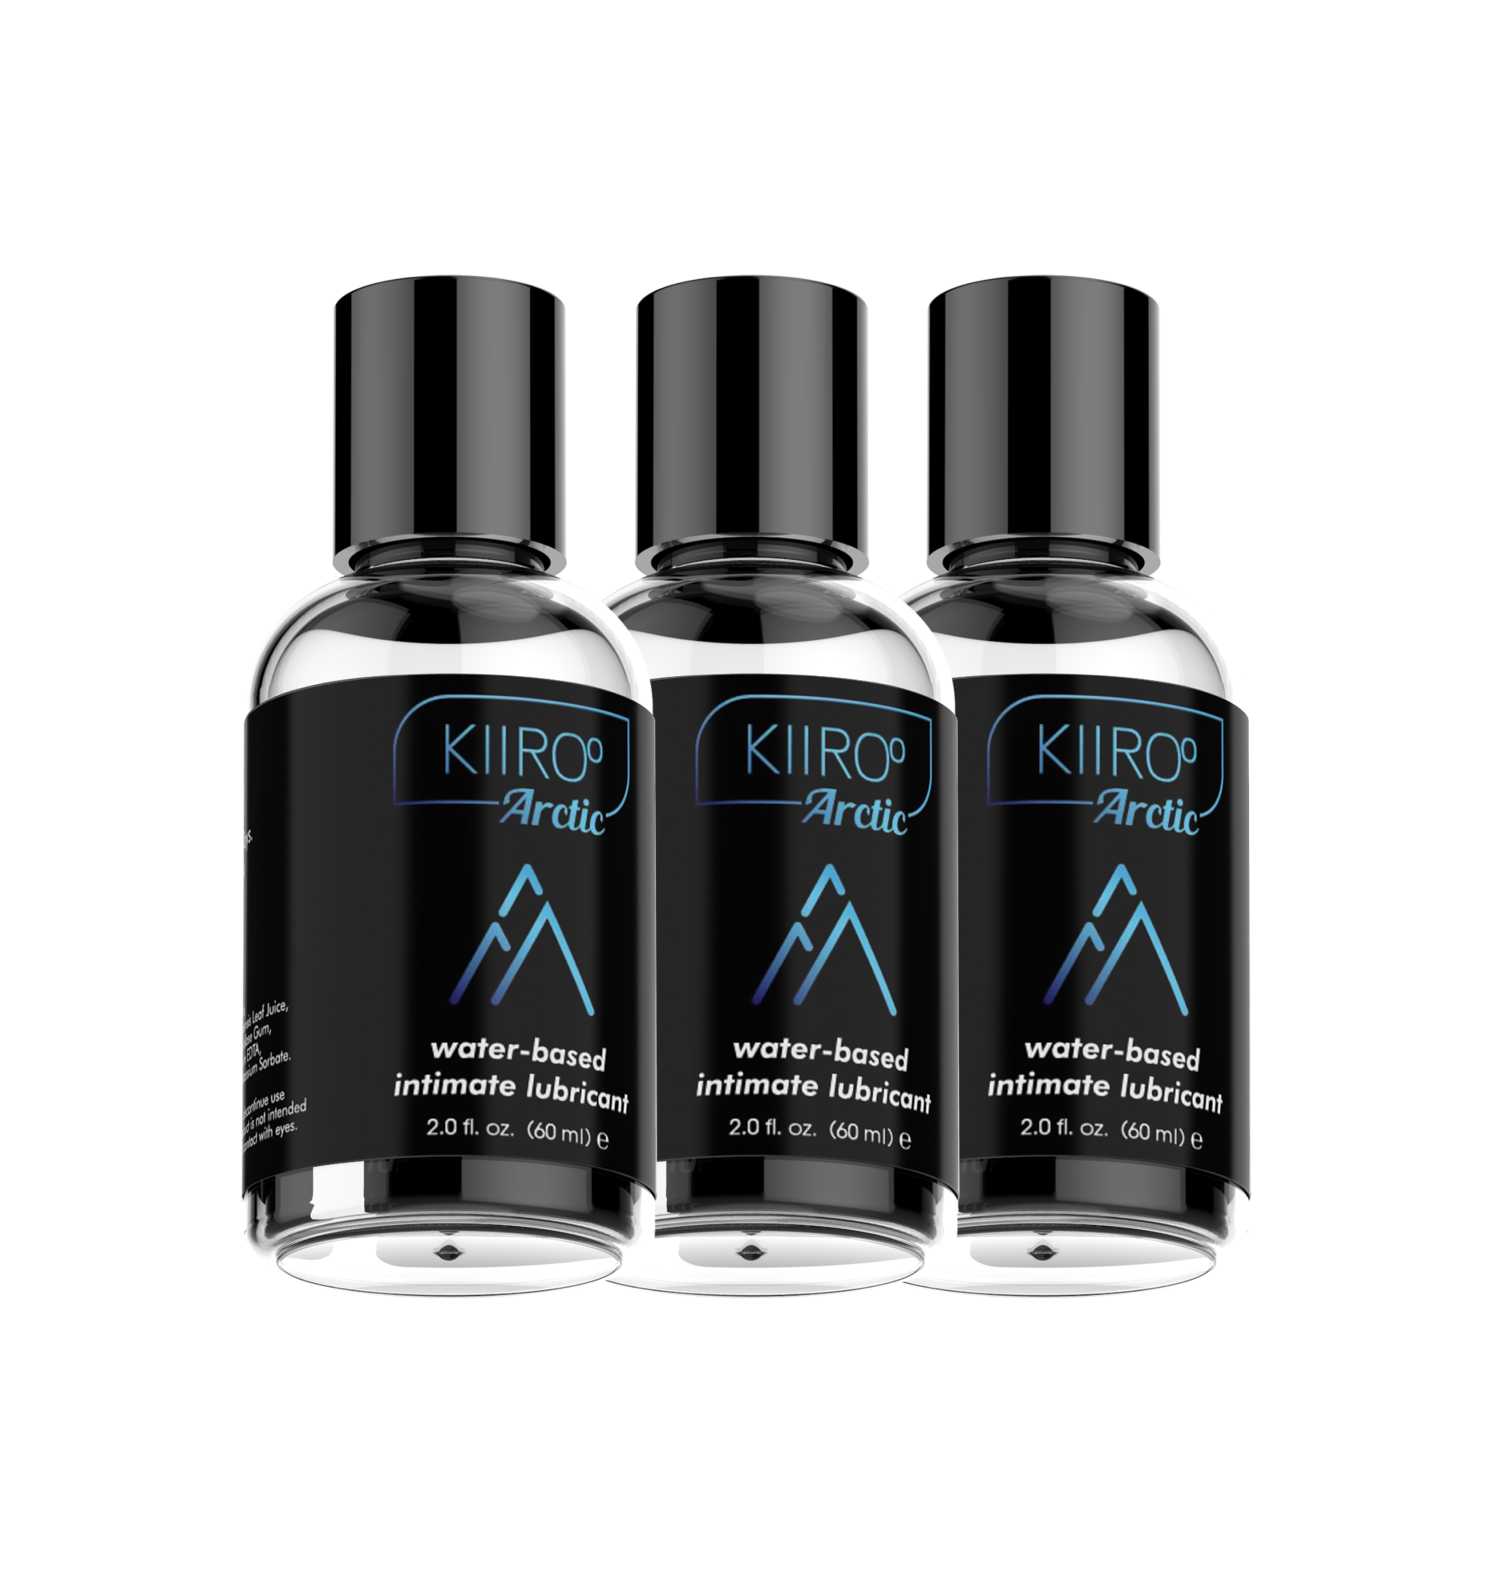 Image of Artic Premium Water-based Intimate Lube (3 Pack)